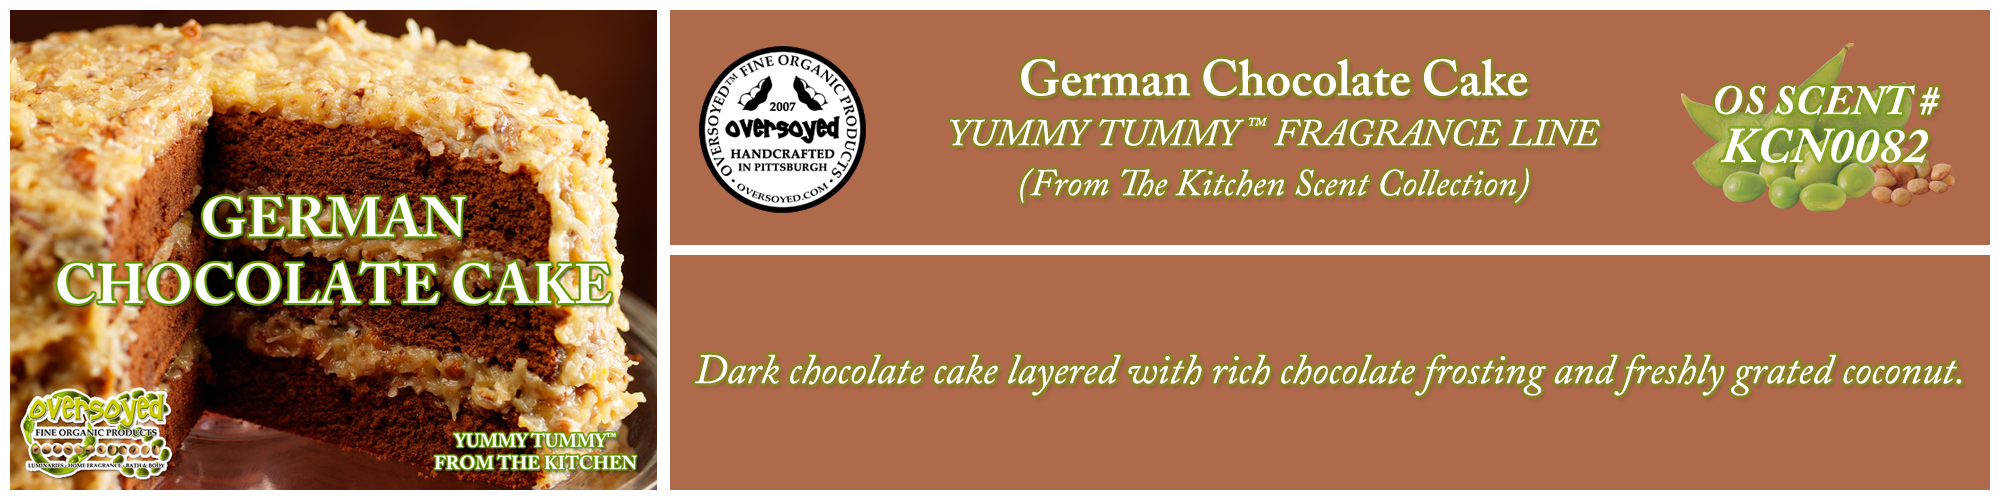 German Chocolate Cake Handcrafted Products Collection